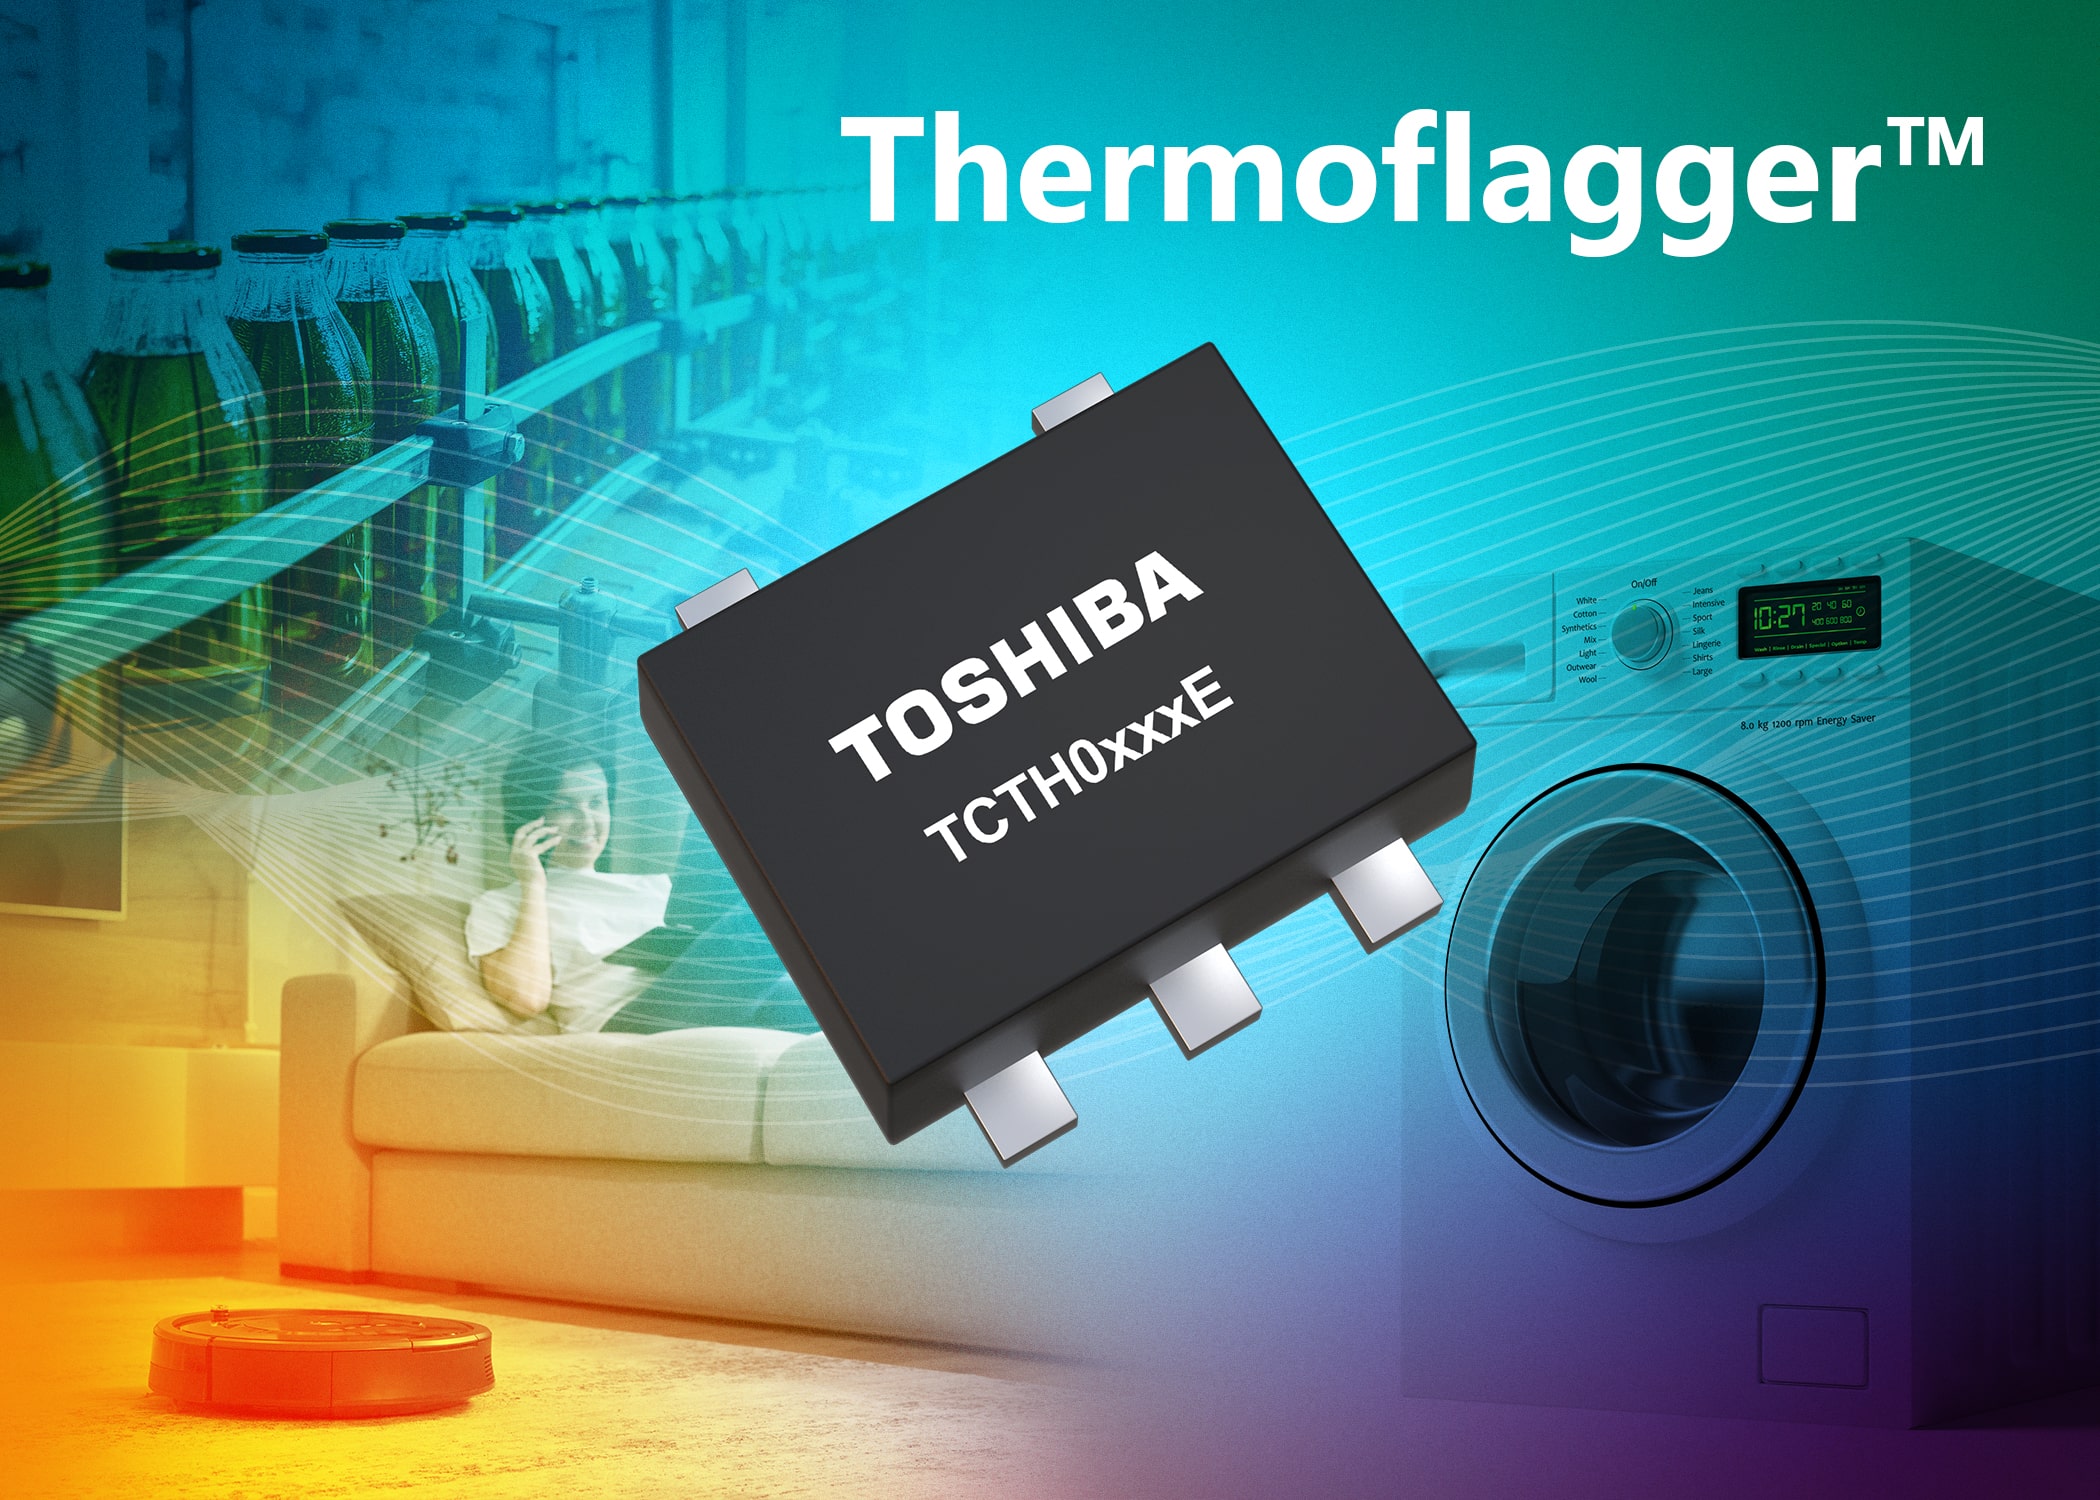 Toshiba announces Thermoflagger<sup>TM</sup> over-temperature detection ICs 